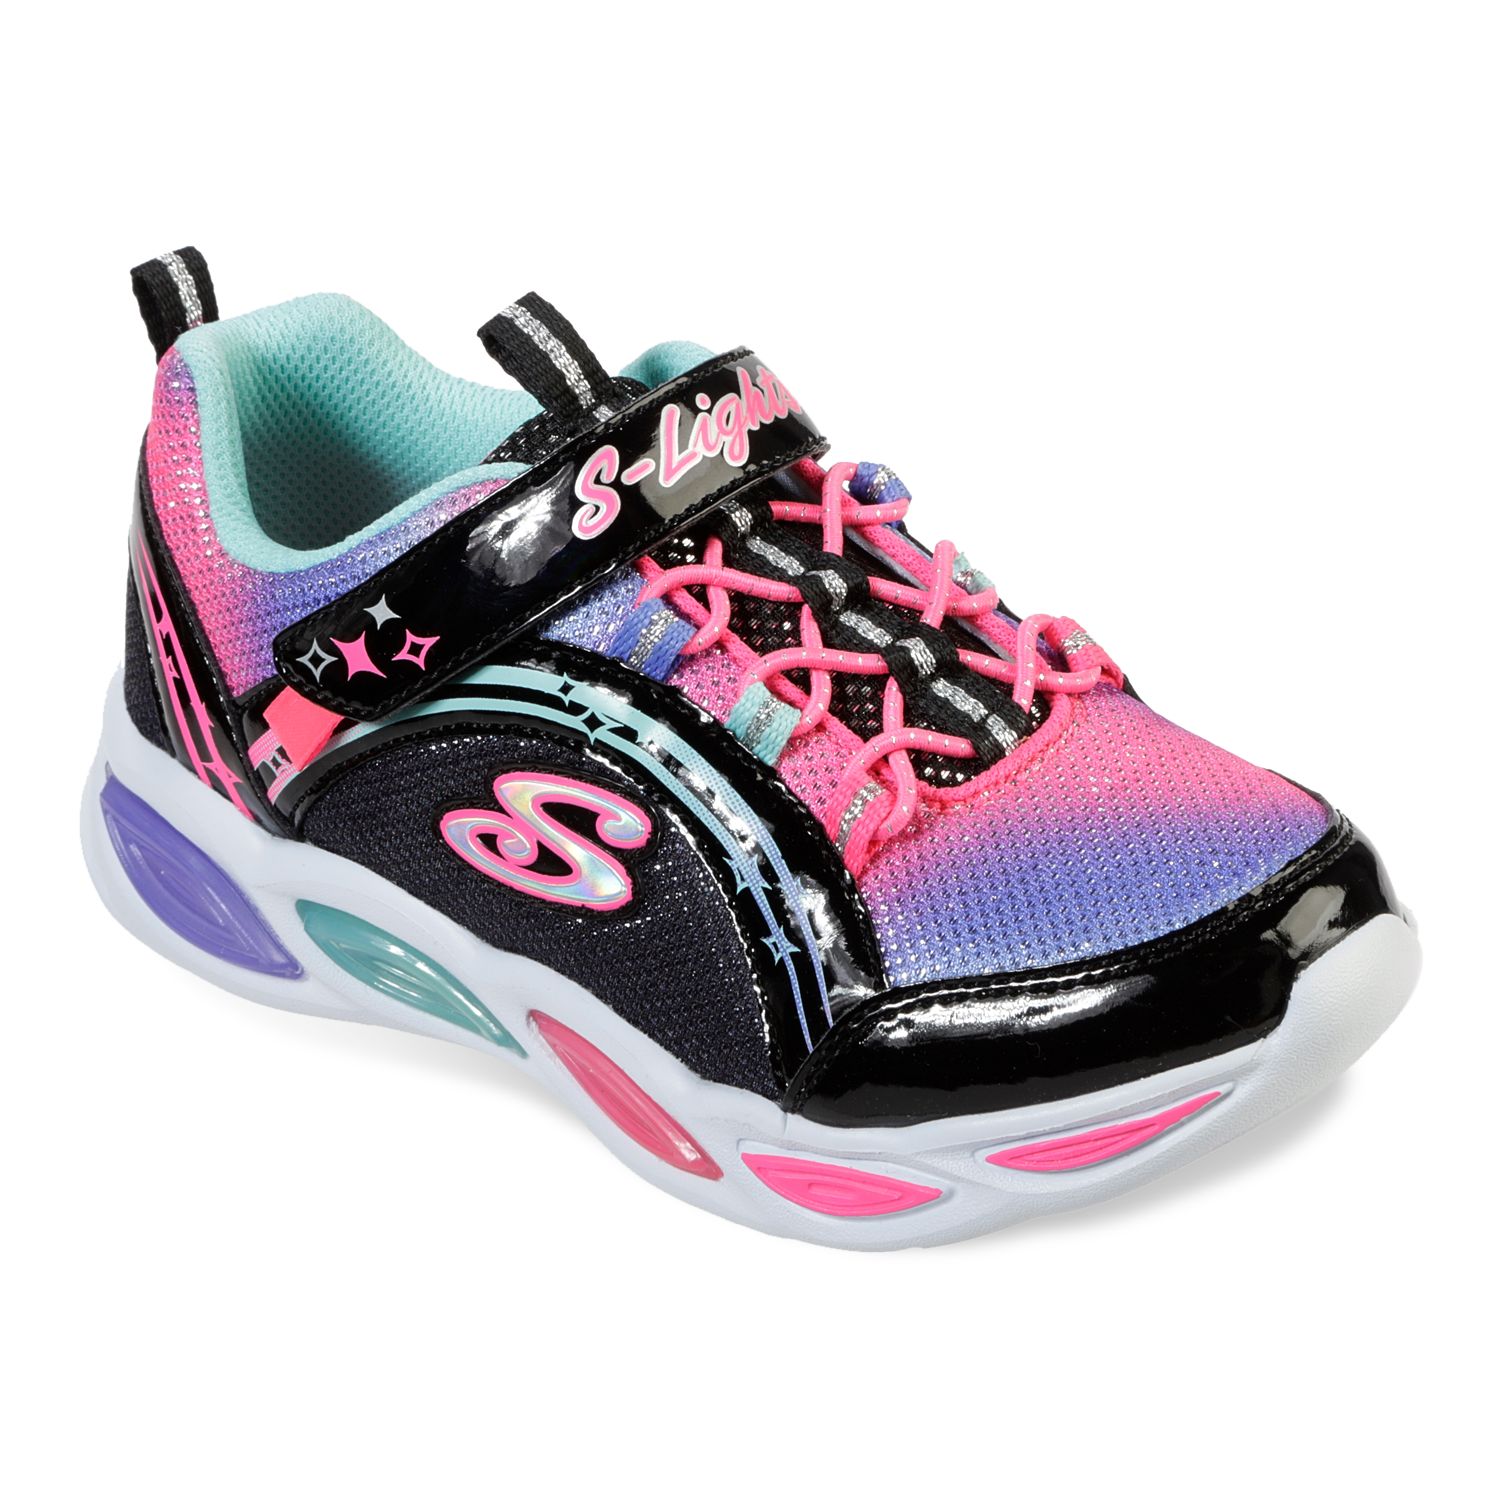 skechers light up sneakers for adults